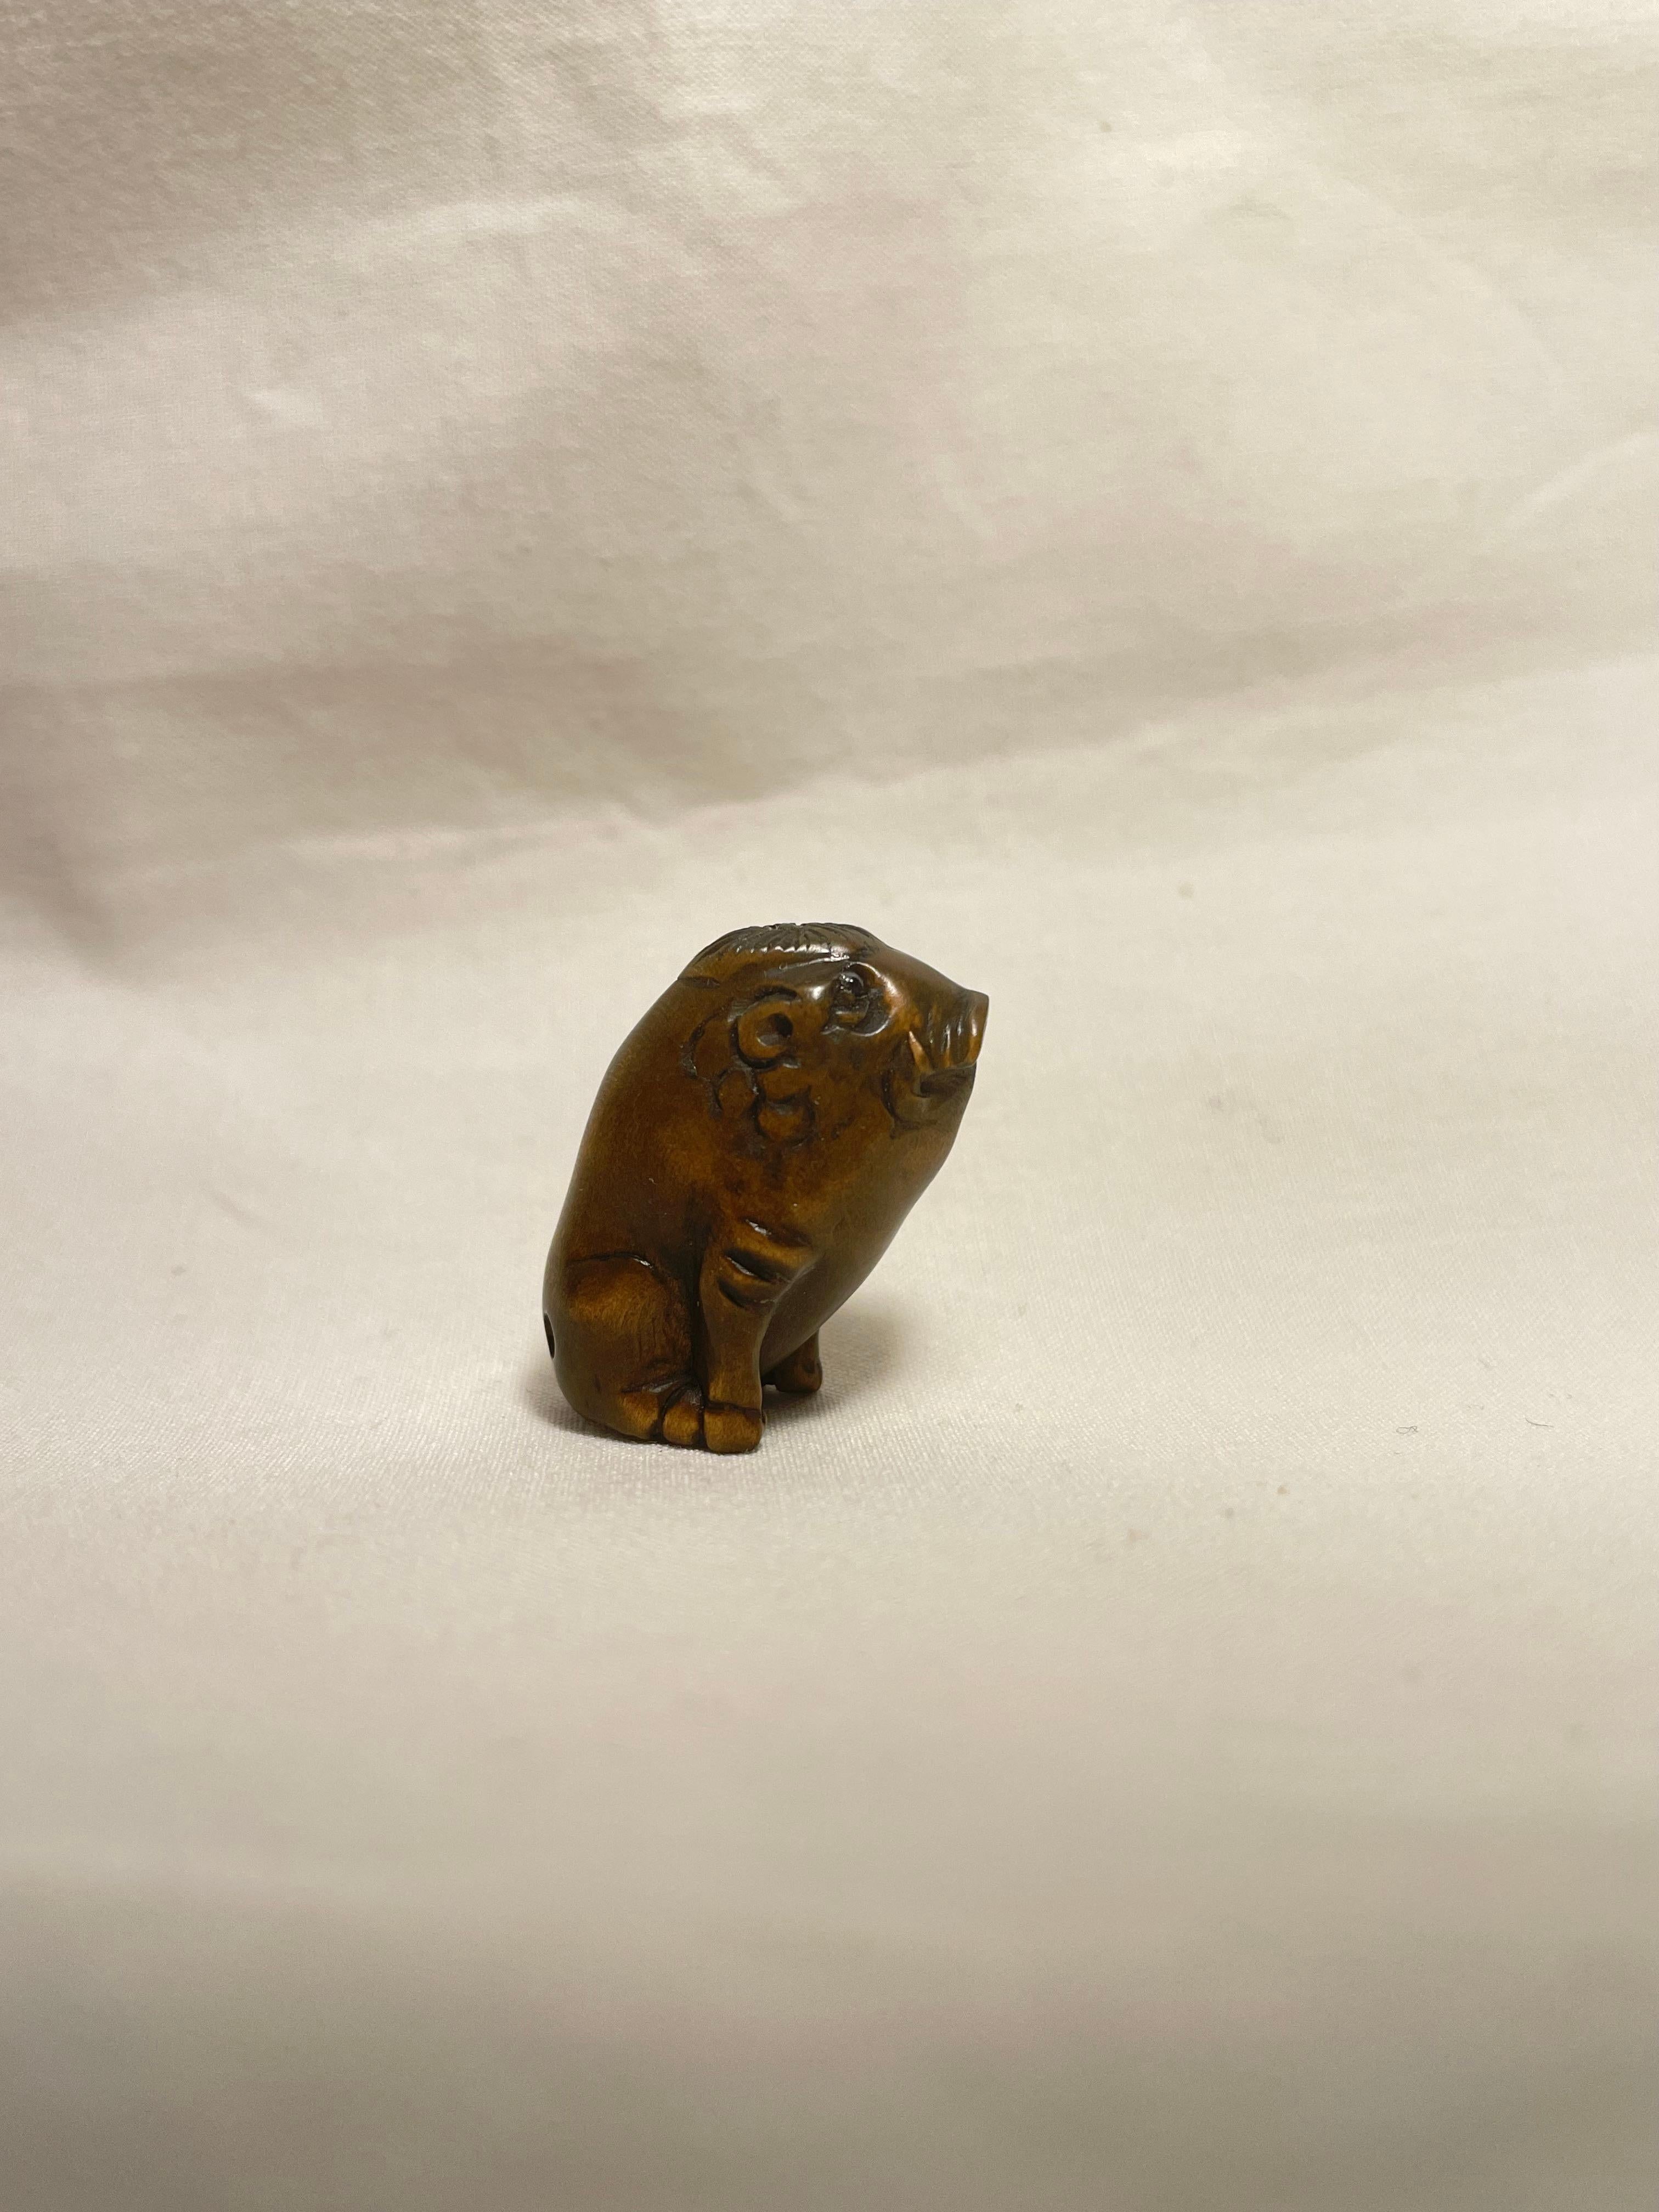 This is an antique netsuke made in Japan around Showa period 1960s.

Dimensions: 1.5 x 2.3 x H2.5cm
Sculpture: Wild Boar
Era: 1960s (Showa) 

Netsuke is a miniature sculpture, originating in 17th century Japan.
Initially a simply-carved button